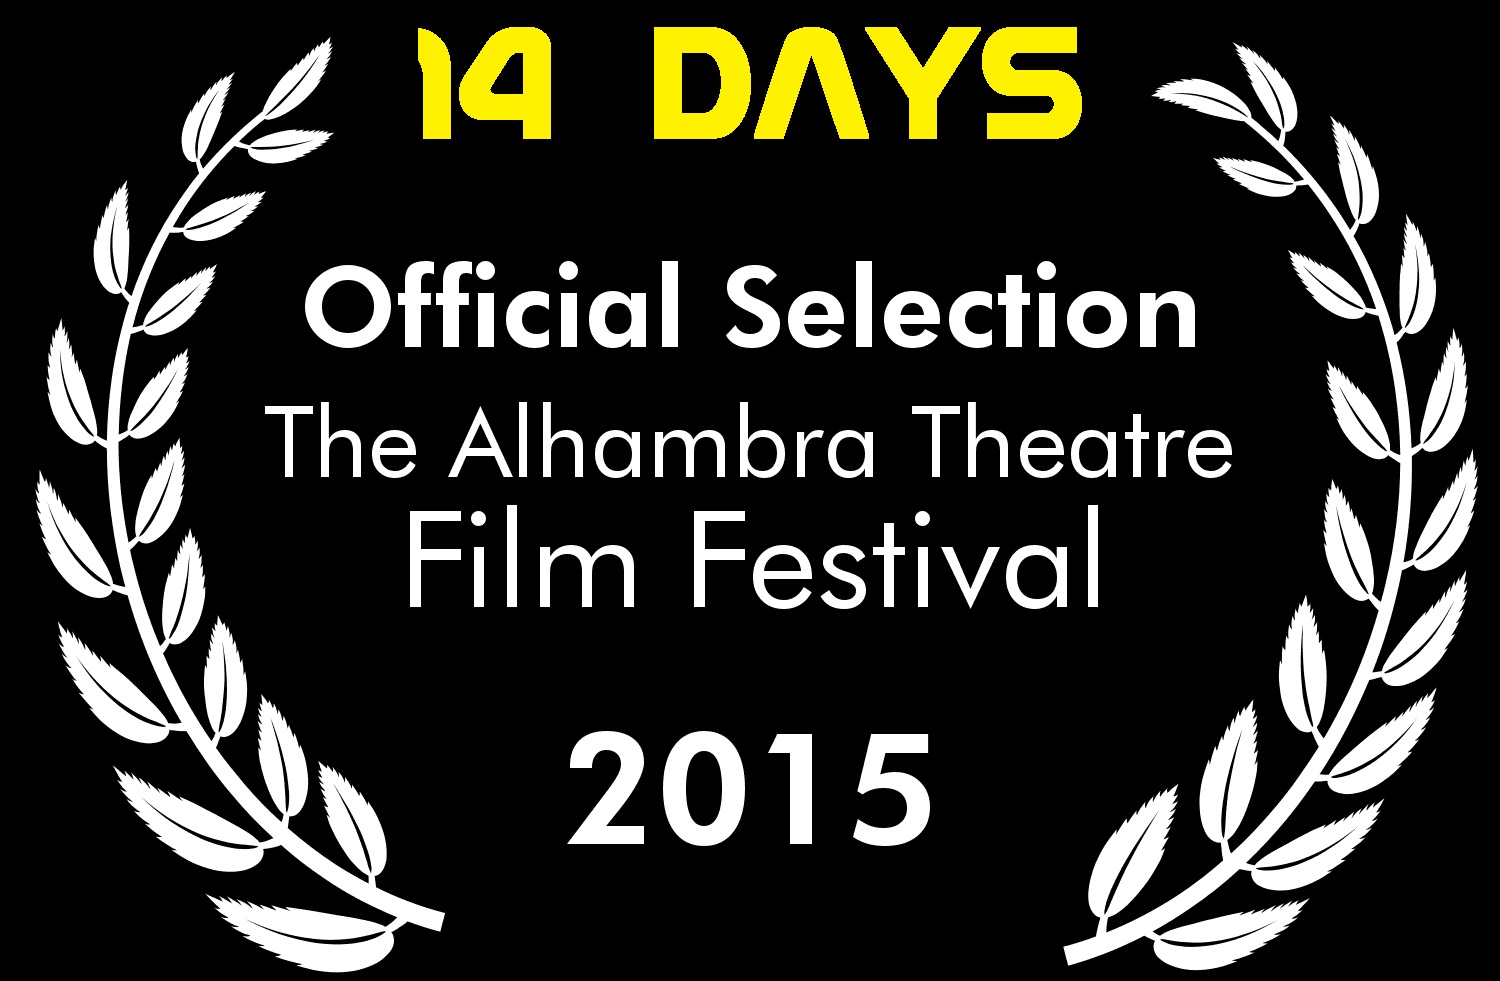 Official Selection laurel for The Alhambra Theatre Film Festival.